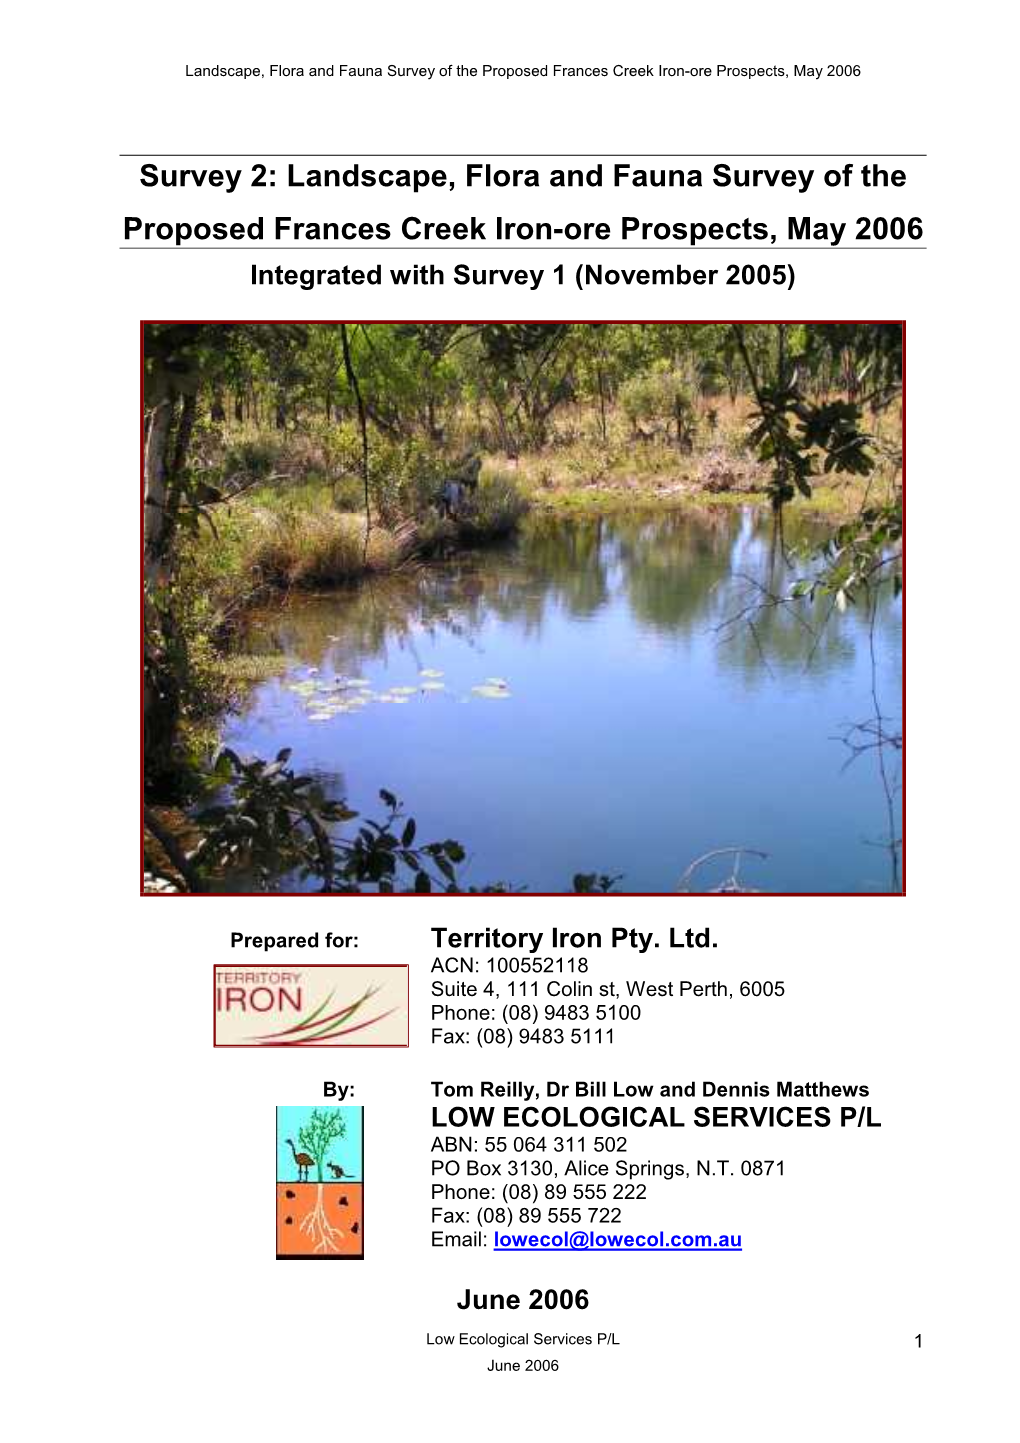 Landscape, Flora and Fauna Survey of the Proposed Frances Creek Iron-Ore Prospects, May 2006